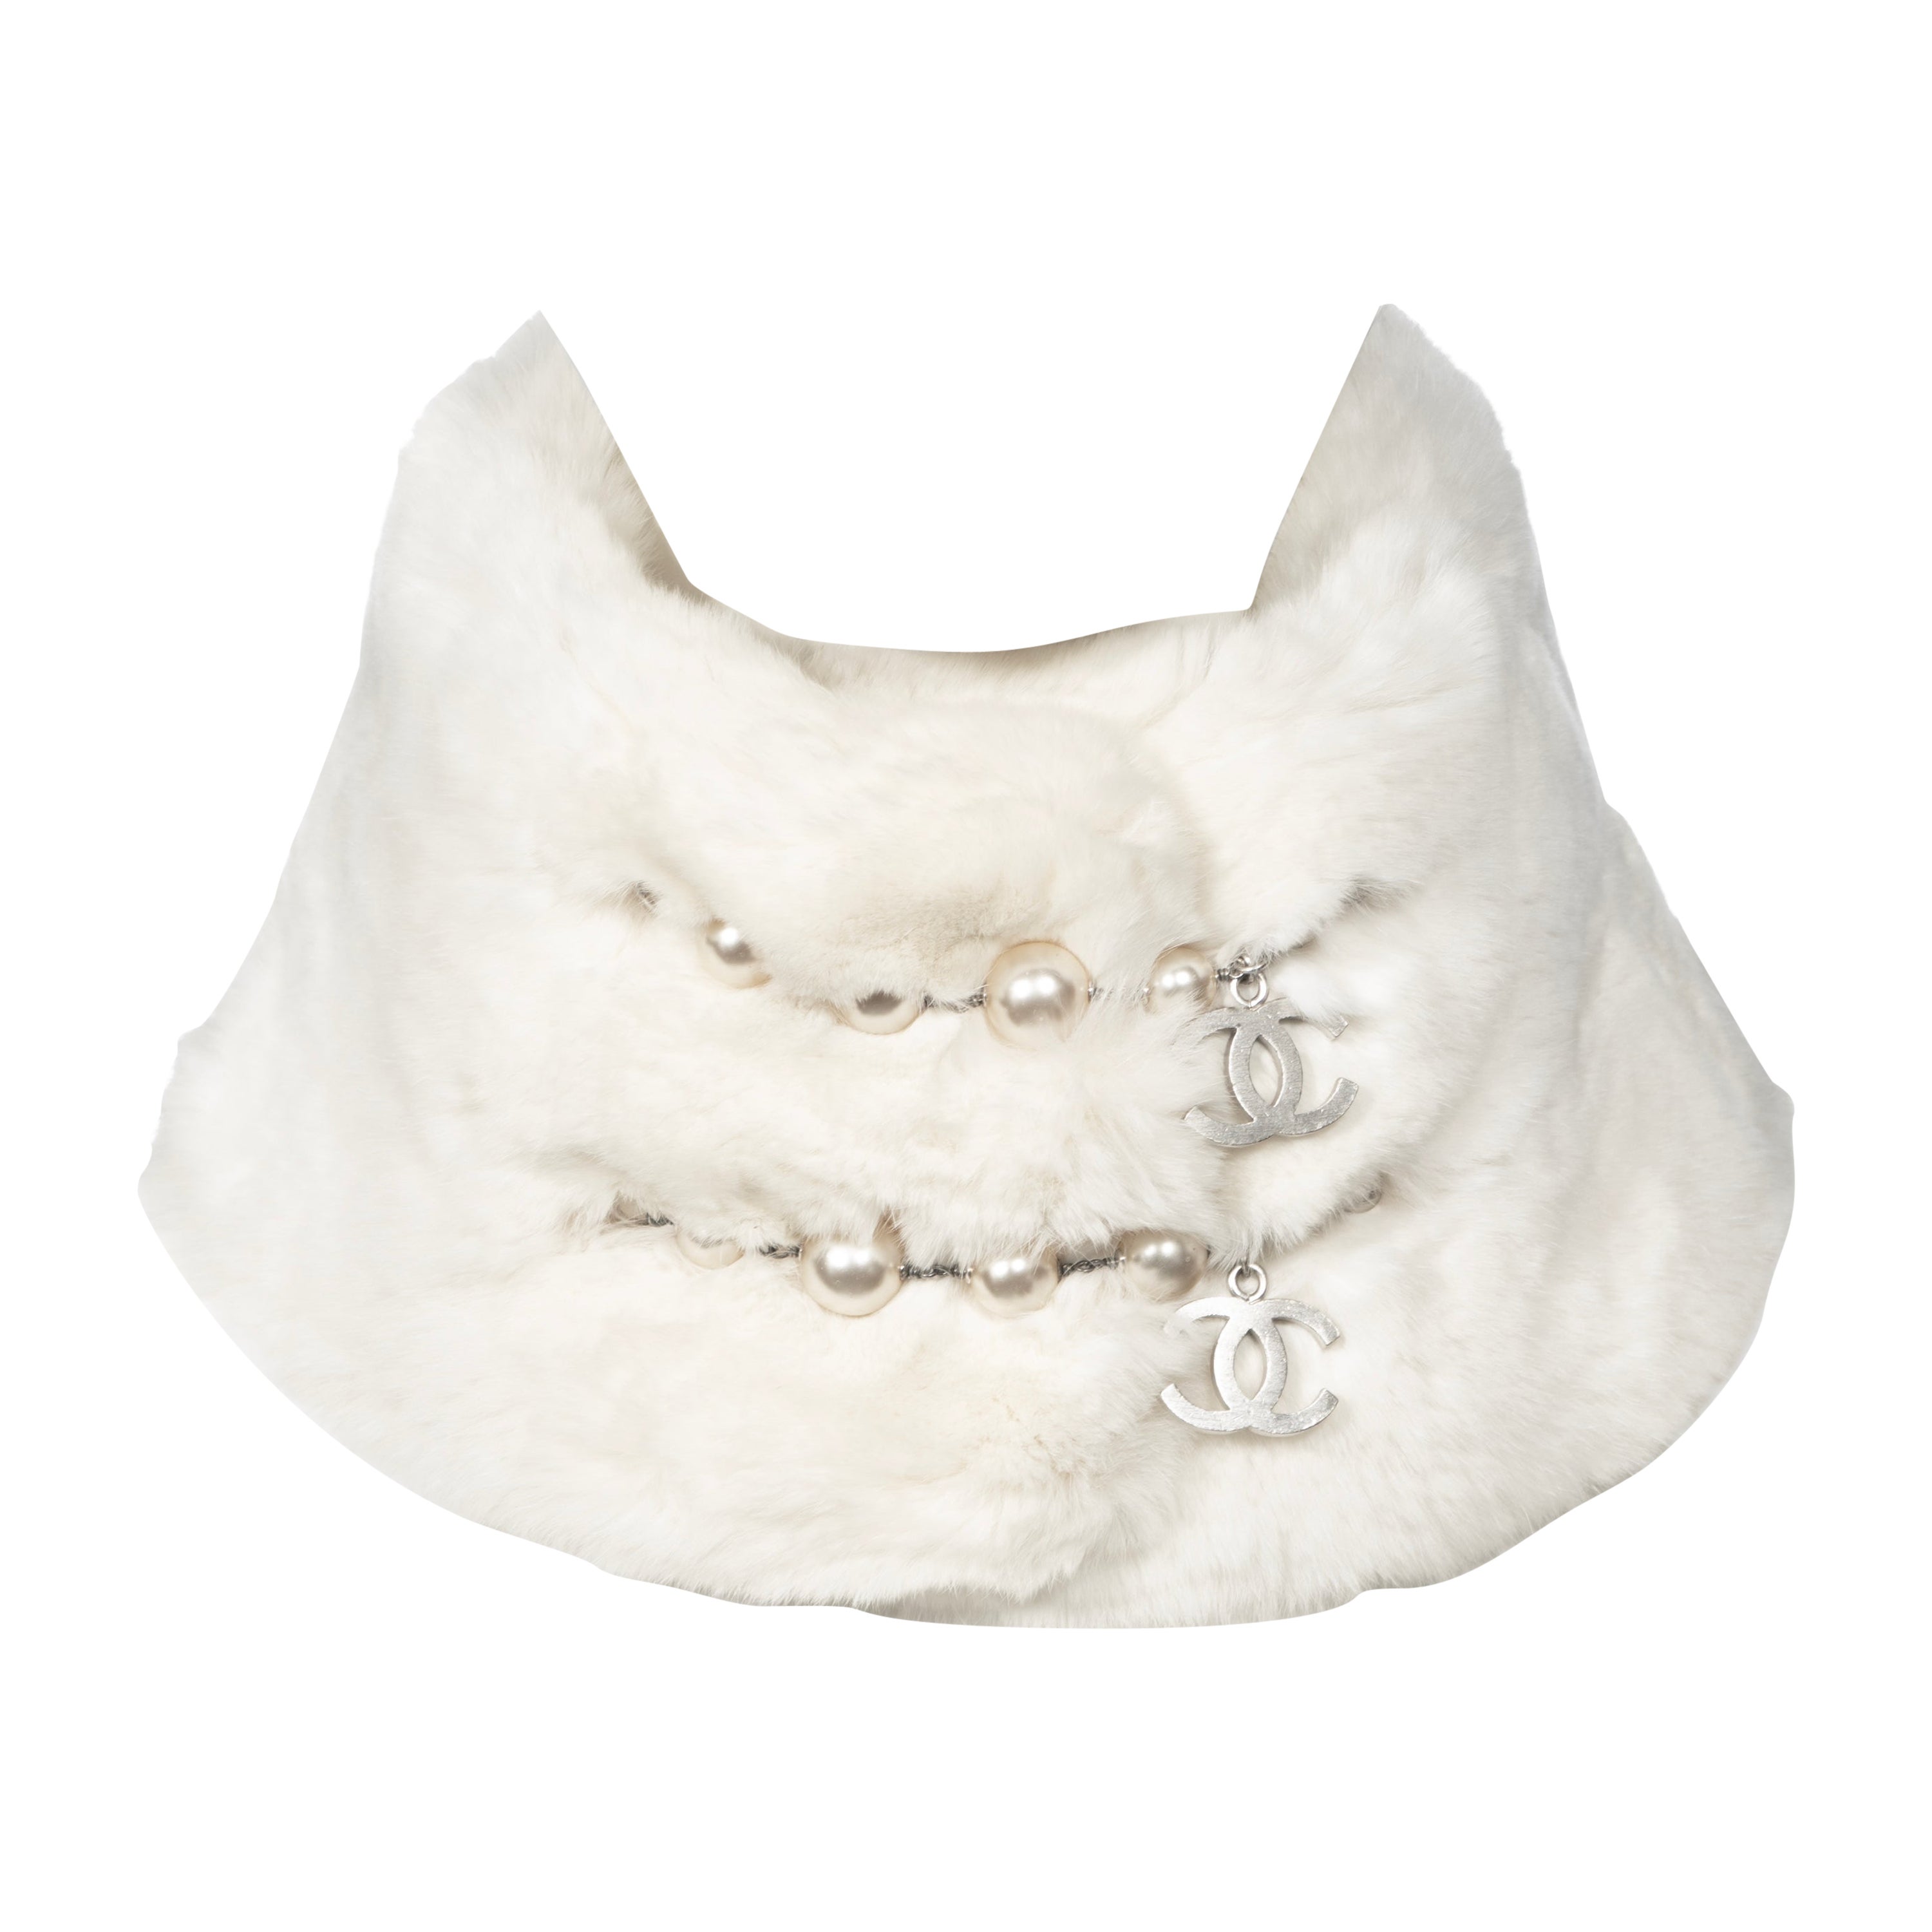 Chanel by Karl Lagerfeld White Rabbit Fur Collar and Cuffs, fw 2003 For Sale